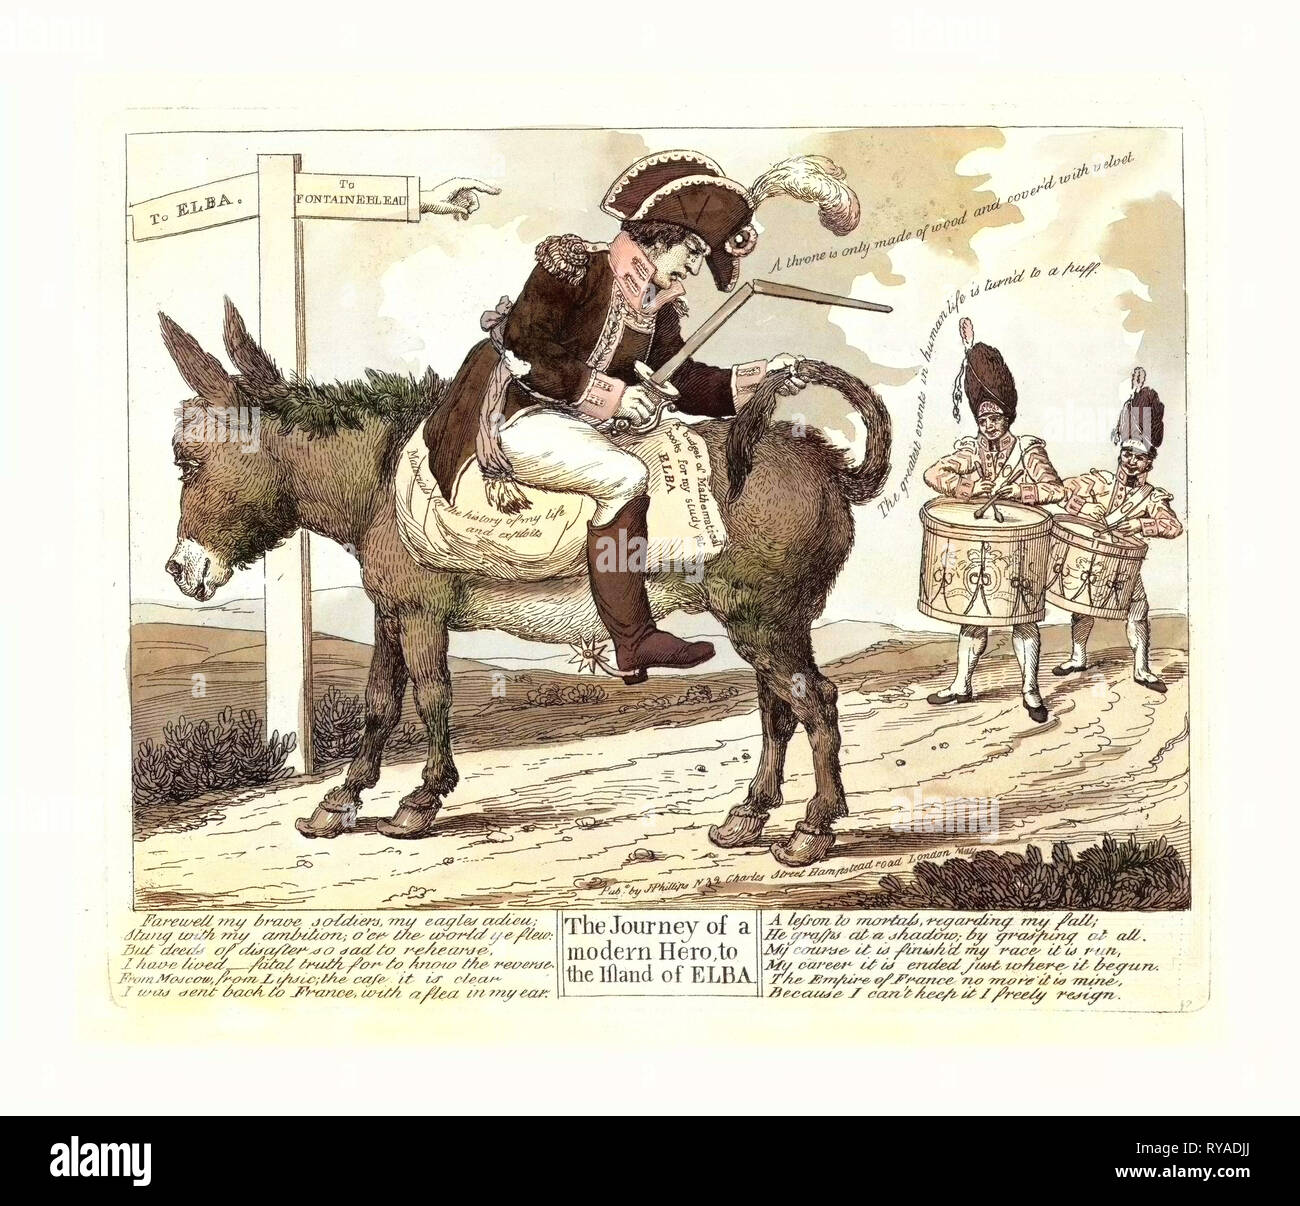 The Journey of a Modern Hero, to the Island of Elba, London, 1814, Napoleon I Seated Backwards on a Donkey on the Road to Elba from Fontainebleau, He Holds a Broken Sword in One Hand and the Donkey's Tail in the Other While Two Drummers Follow Him Playing a Farewell(?) March. Includes Twelve Lines of Verse Stock Photo